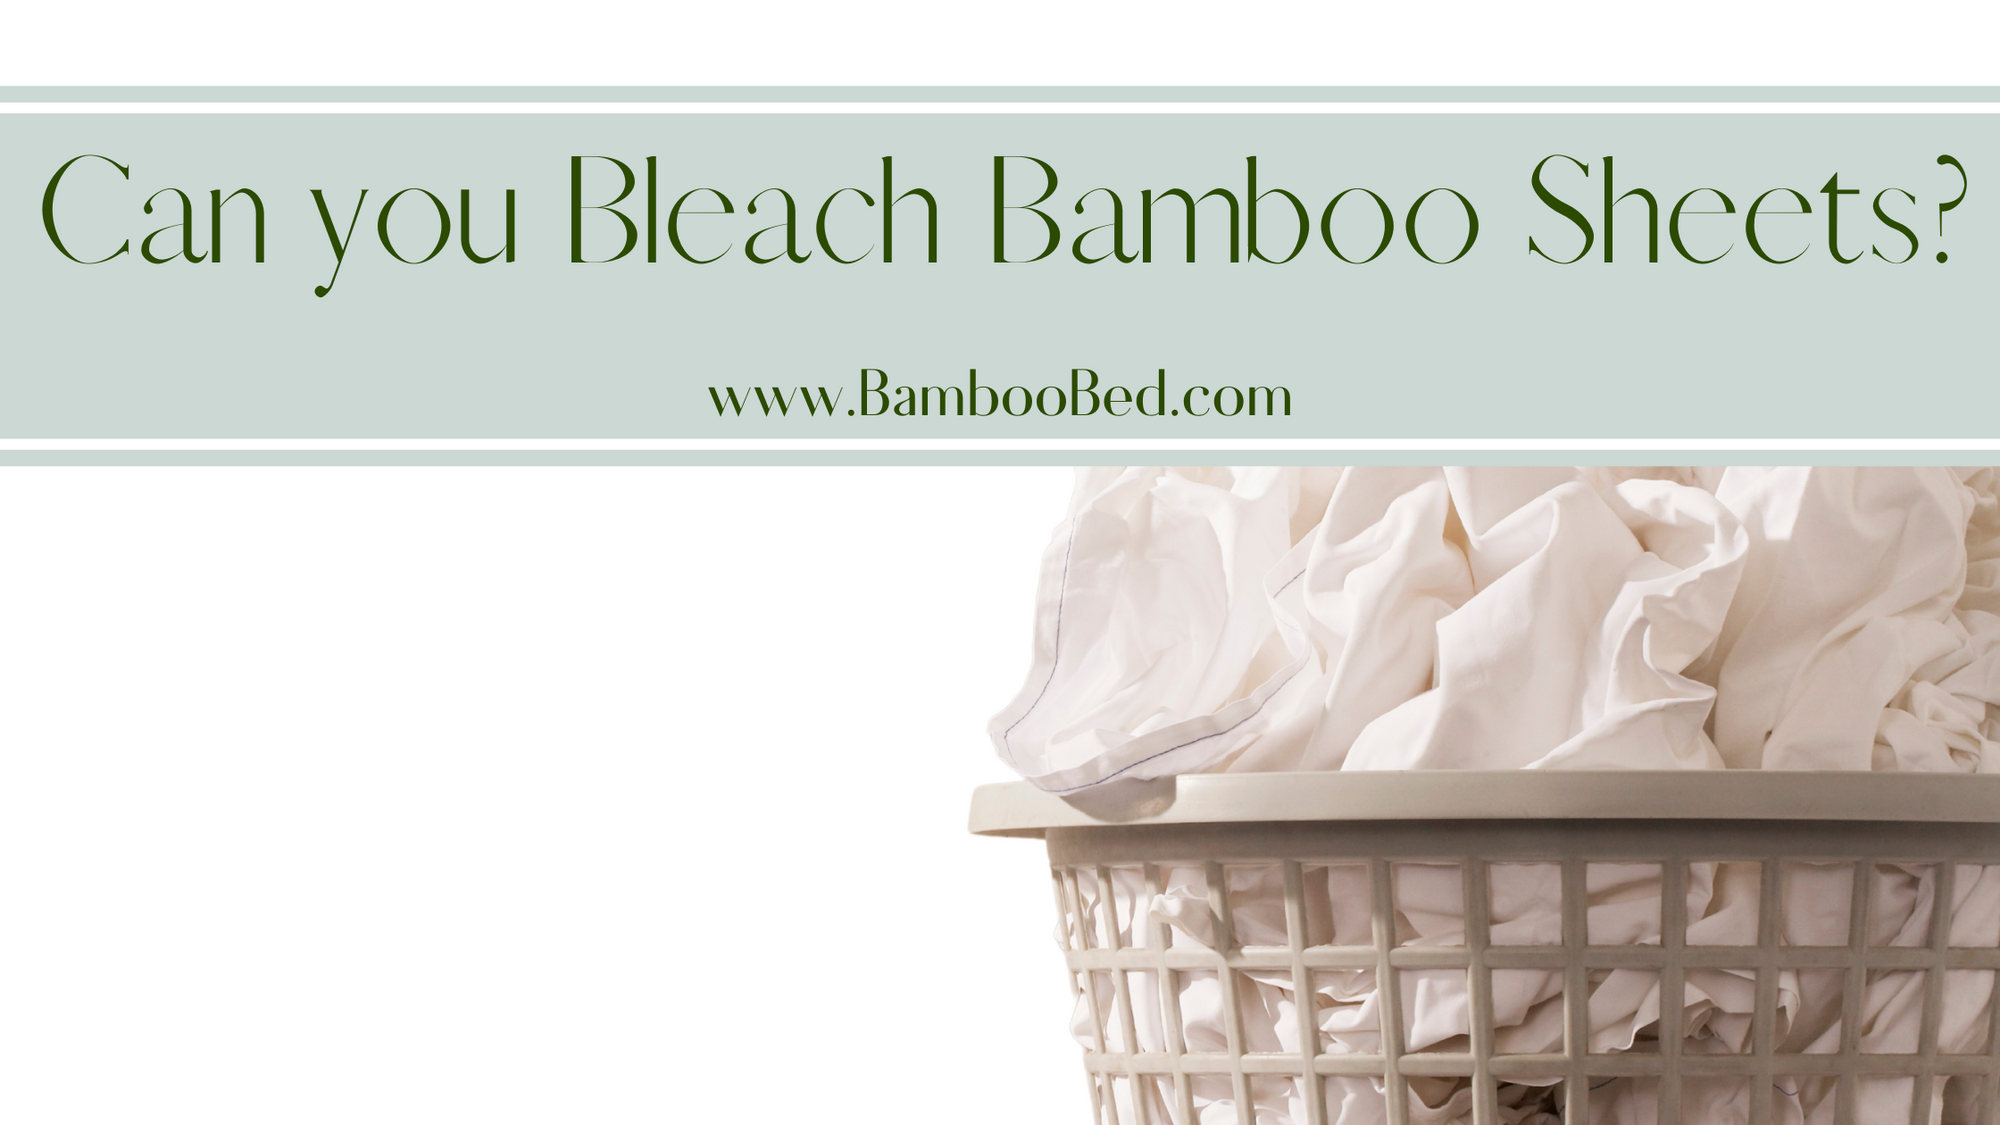 bamboo sheets are in the washing machine for cleaning with bleach